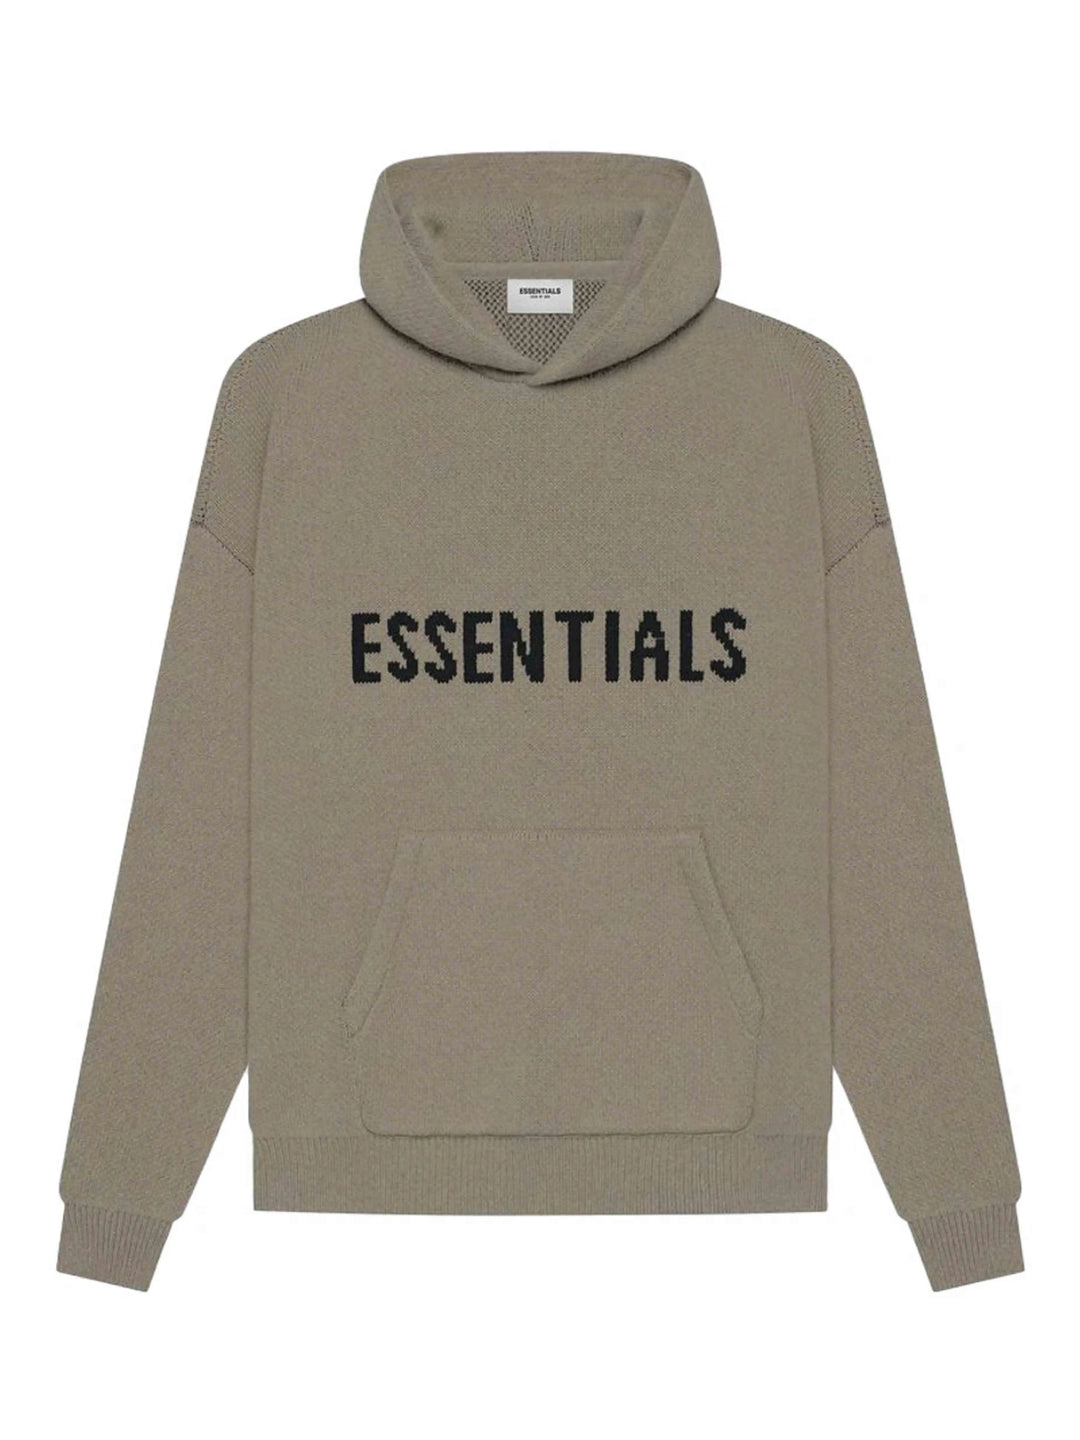 Fear Of God Essentials Knit Pullover Hoodie Taupe [SS21] Prior